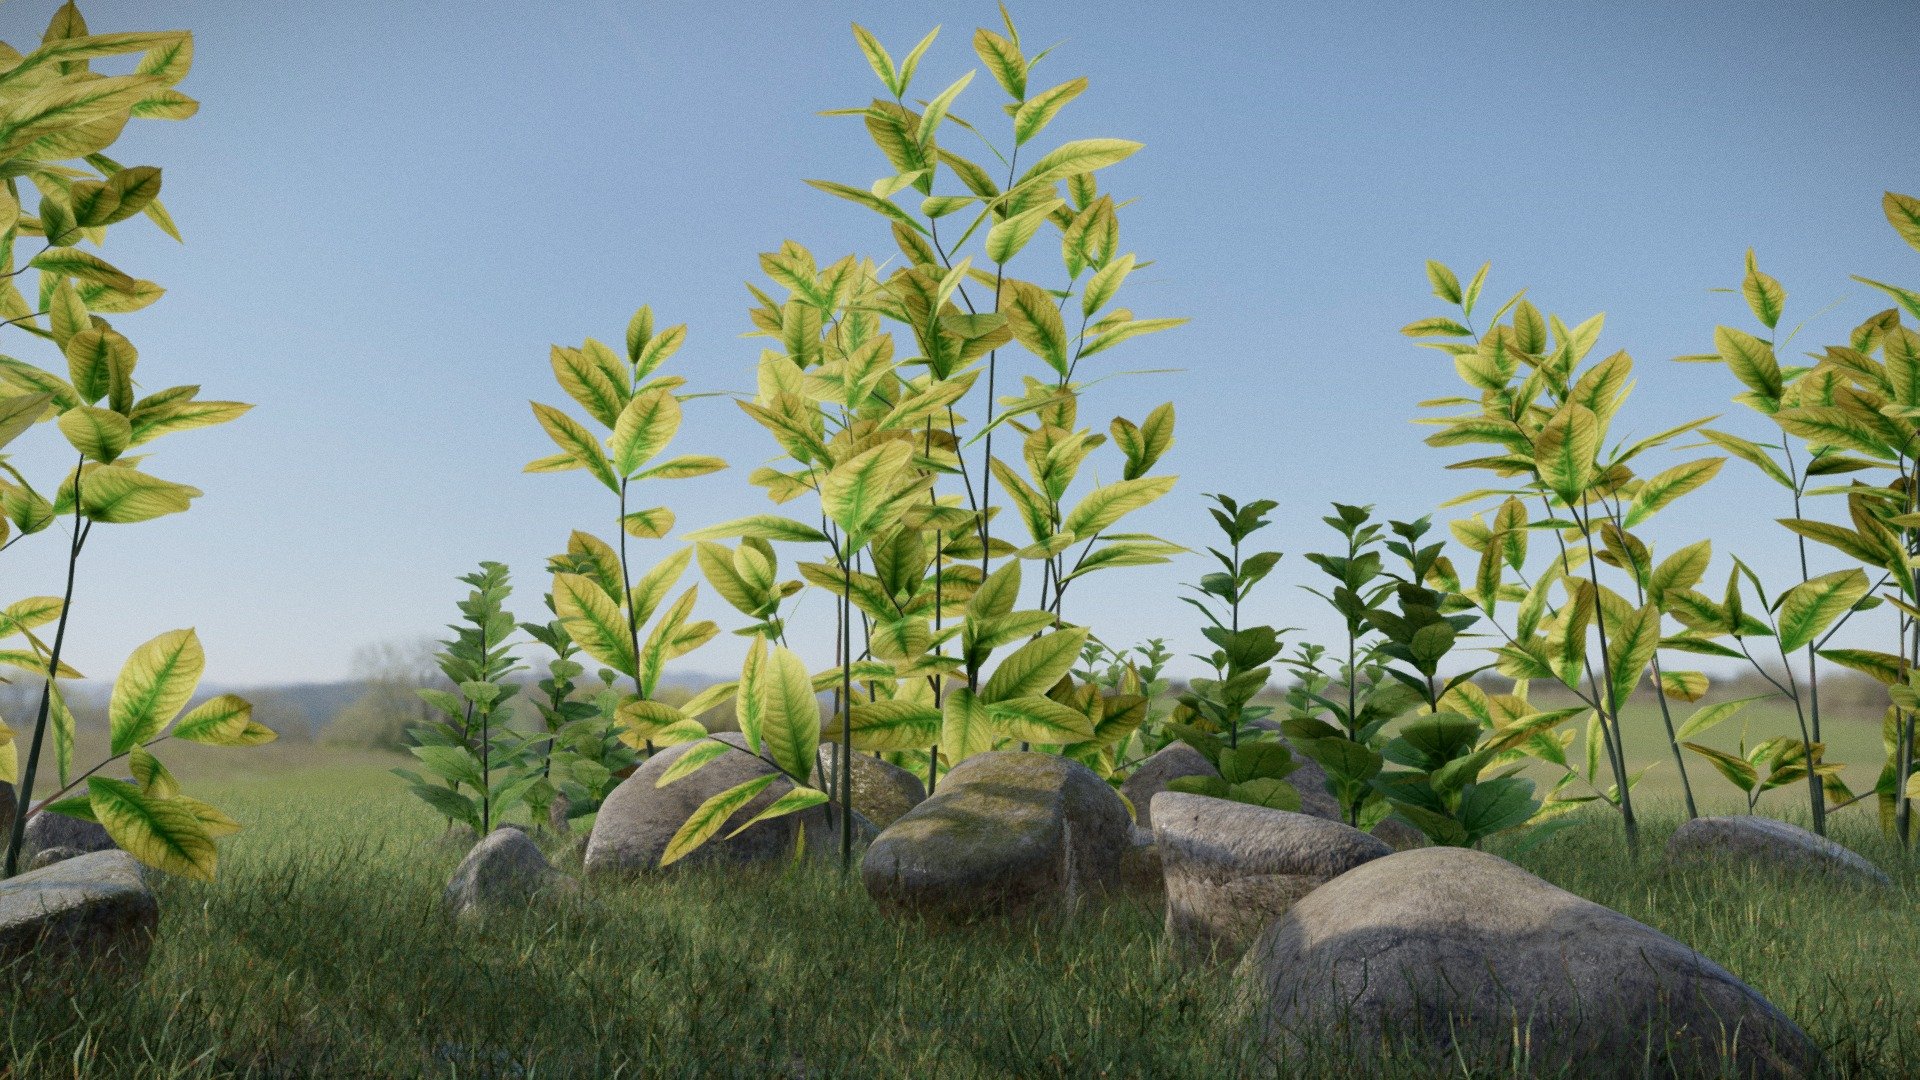 Plants Scene Free!
Thanks Sketchfab Team and My Followers.



Another Free Asset for achieving 300+ Followers. All the assets used in this scene are free.




Link For the Free Assets :-
https://sketchfab.com/3d-models/realistic-grass-pack-for-games-free-9b958d613e9a44dbba580748e7a1789c



https://sketchfab.com/3d-models/smooth-rocks-pack-4503b42e55fd4fd4b42f0f18abc43298



https://sketchfab.com/3d-models/ivy-high-poly-f10e66e2e77a4dda9a7147cd89f2082b



https://sketchfab.com/3d-models/more-realistic-trees-free-b5b506fc4f5d4af9b546283bdf0c6a15


Thank You!

Like and Follow for more free models in future! - Plants Scene Free! - Download Free 3D model by Nicholas-3D (@Nicholas01) 3d model